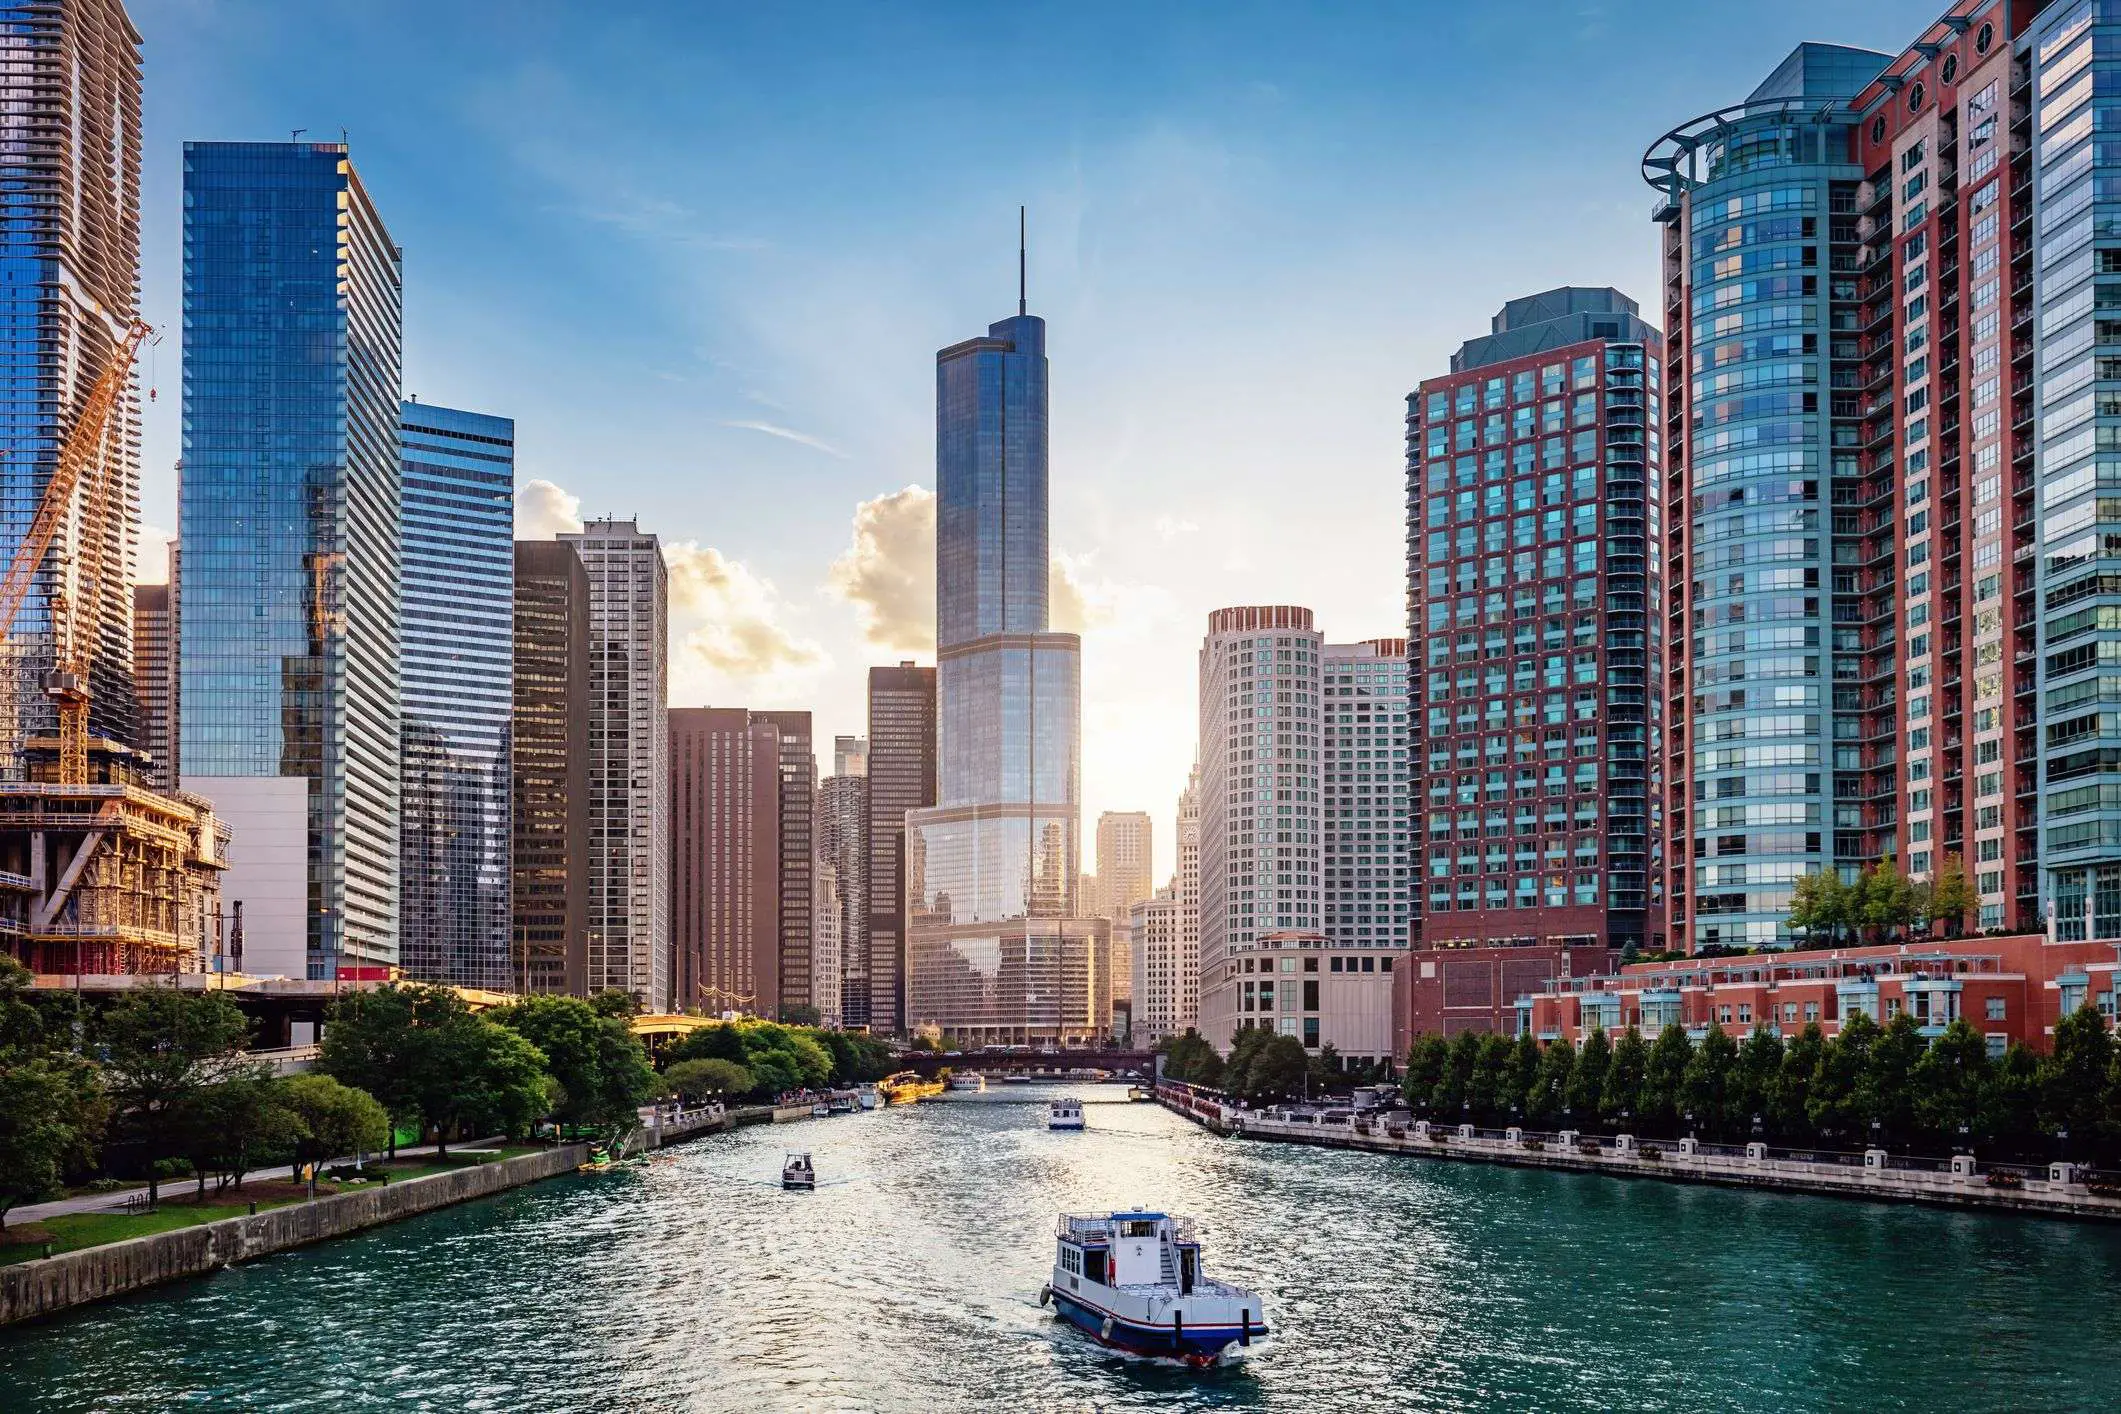 The 7 Best Chicago Architecture Boat Tours of 2021